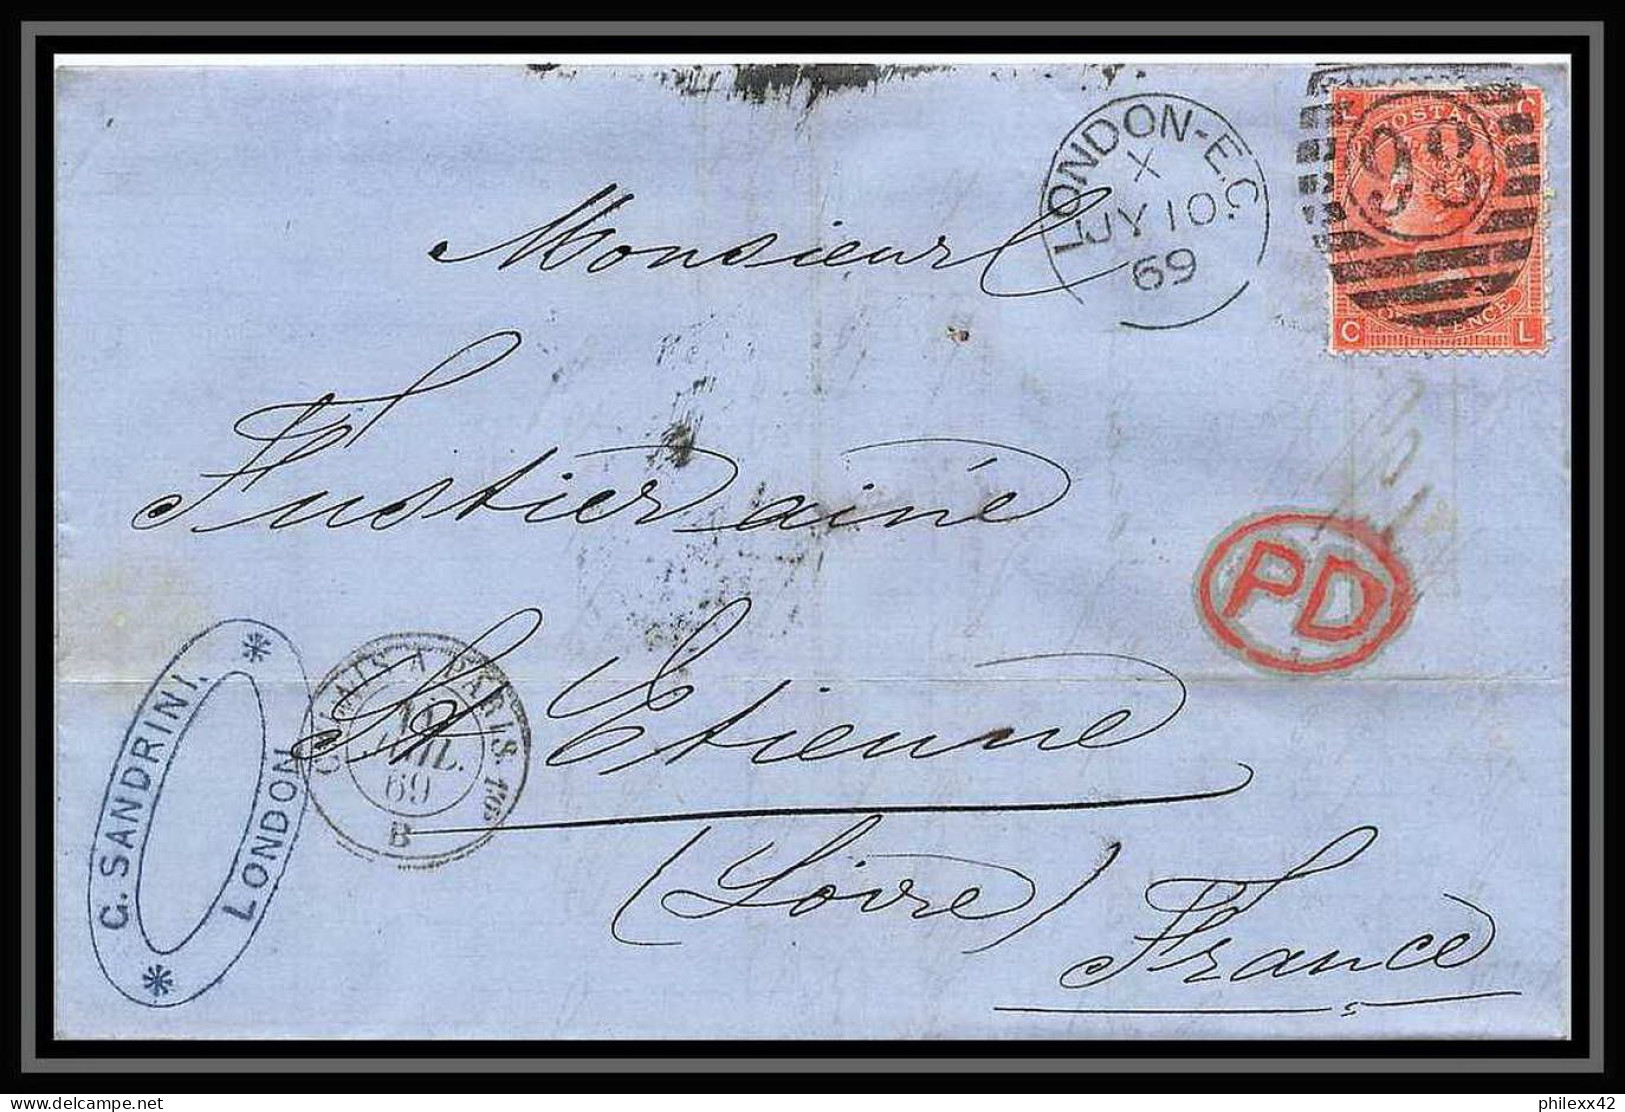 35816 N°32 Victoria 4p Red London St Etienne France 1869 Cachet 98 Lettre Cover Grande Bretagne England - Covers & Documents